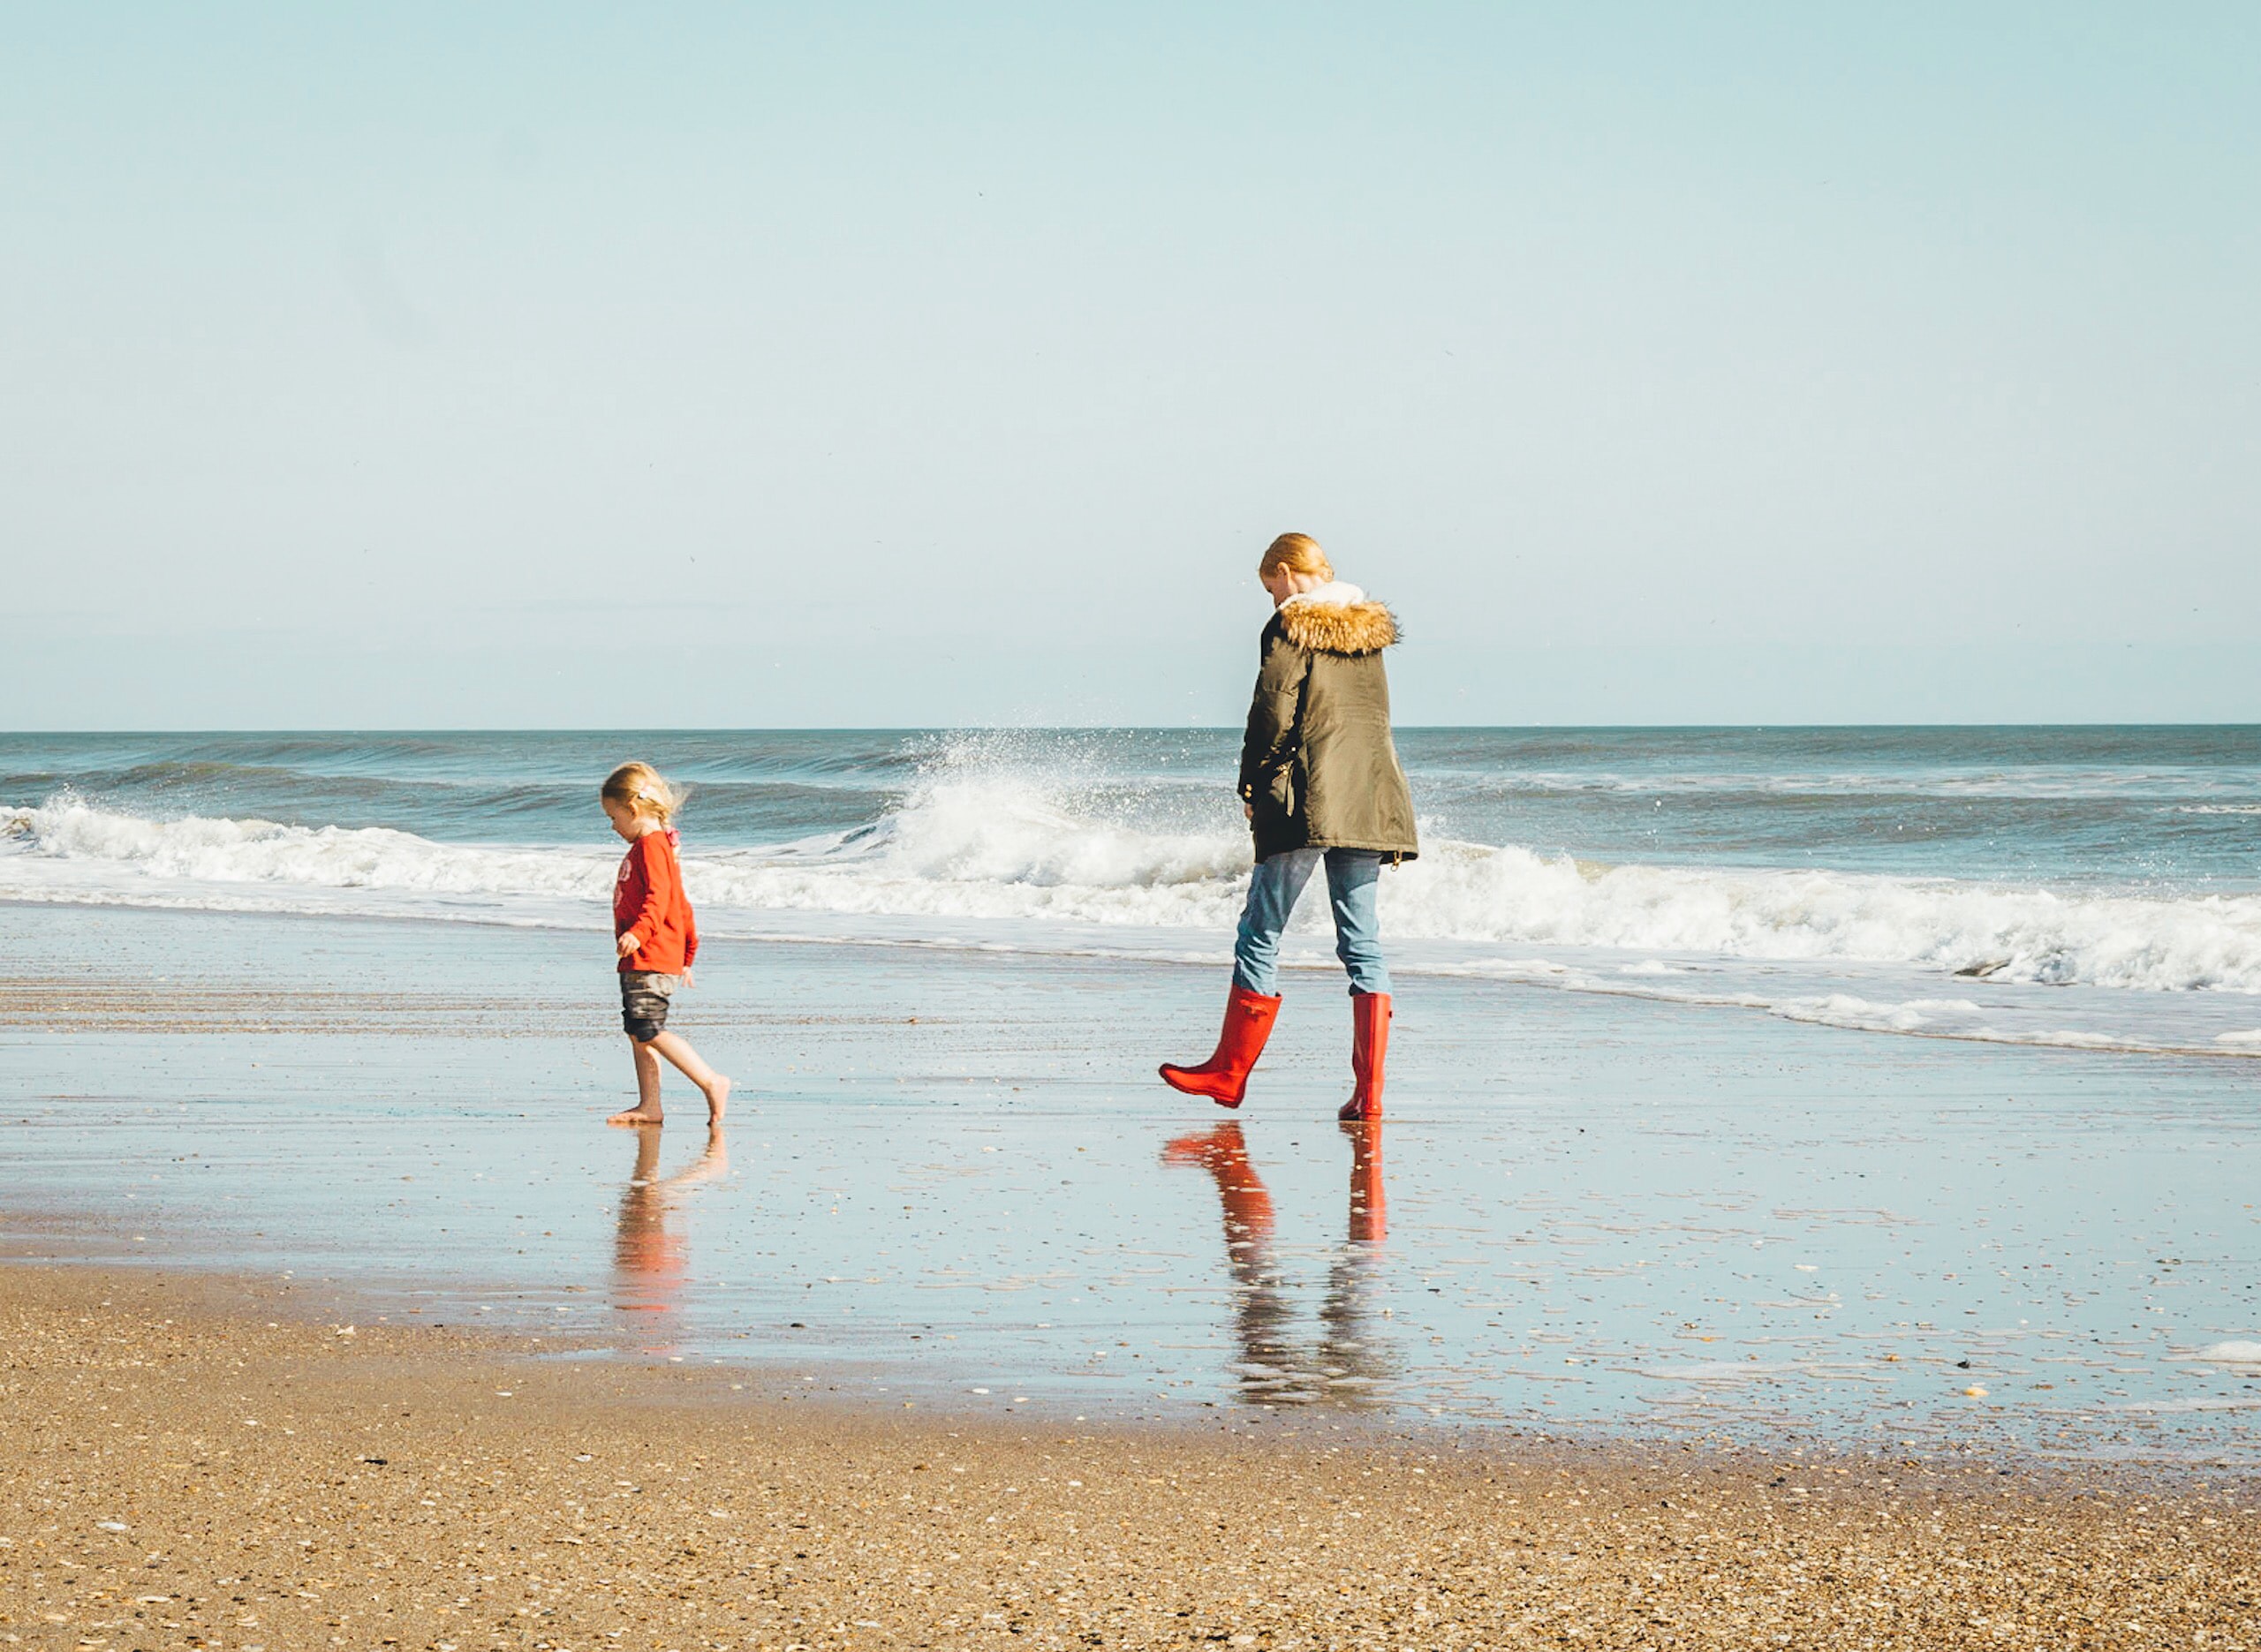 Mom in parka and boots walking on beach with barefoot toddler in shorts; image by Brian Gordillo, via Unsplash.com.